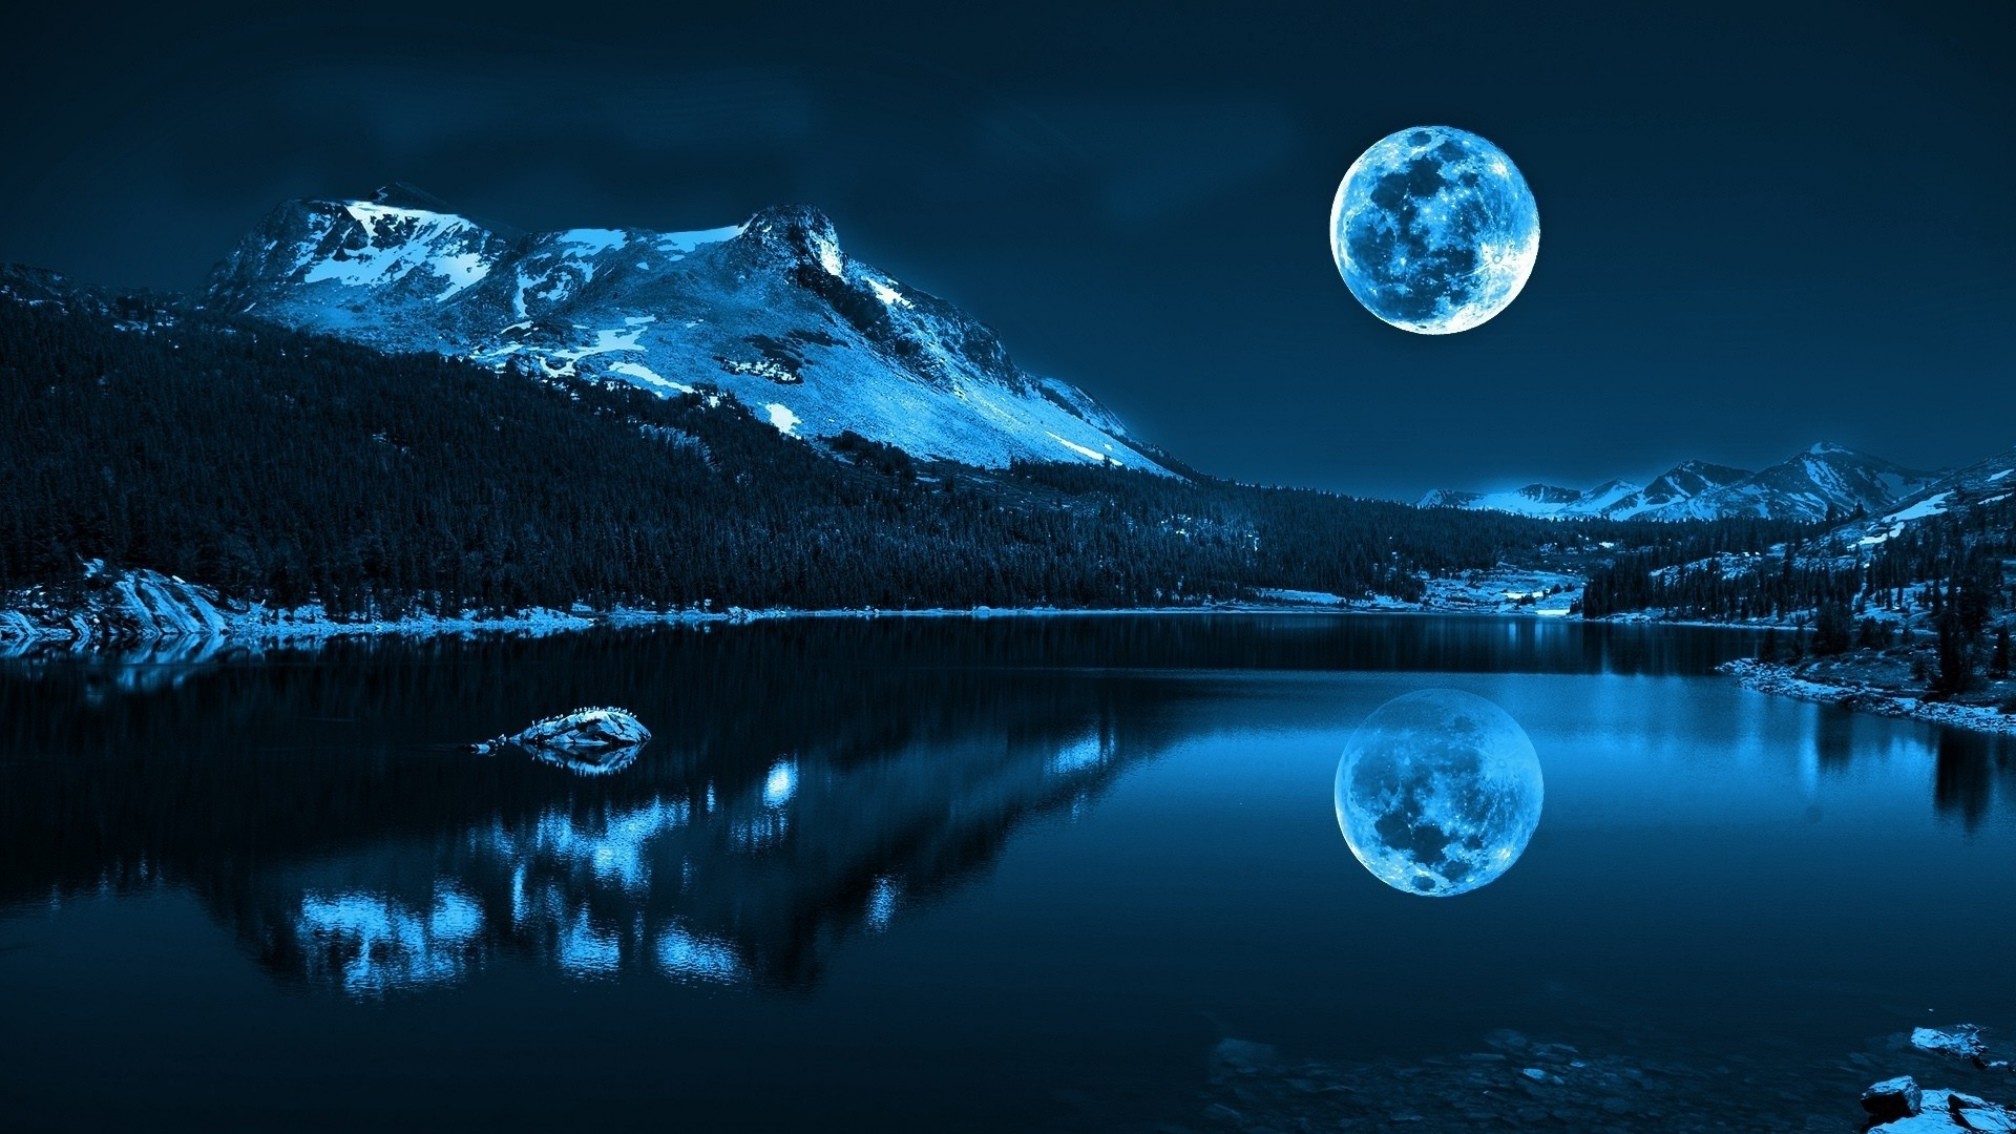 2016x1134 Image for 3D Wallpaper Of Lake And Moon Wallpaper Backgrounds HD Wallpapers